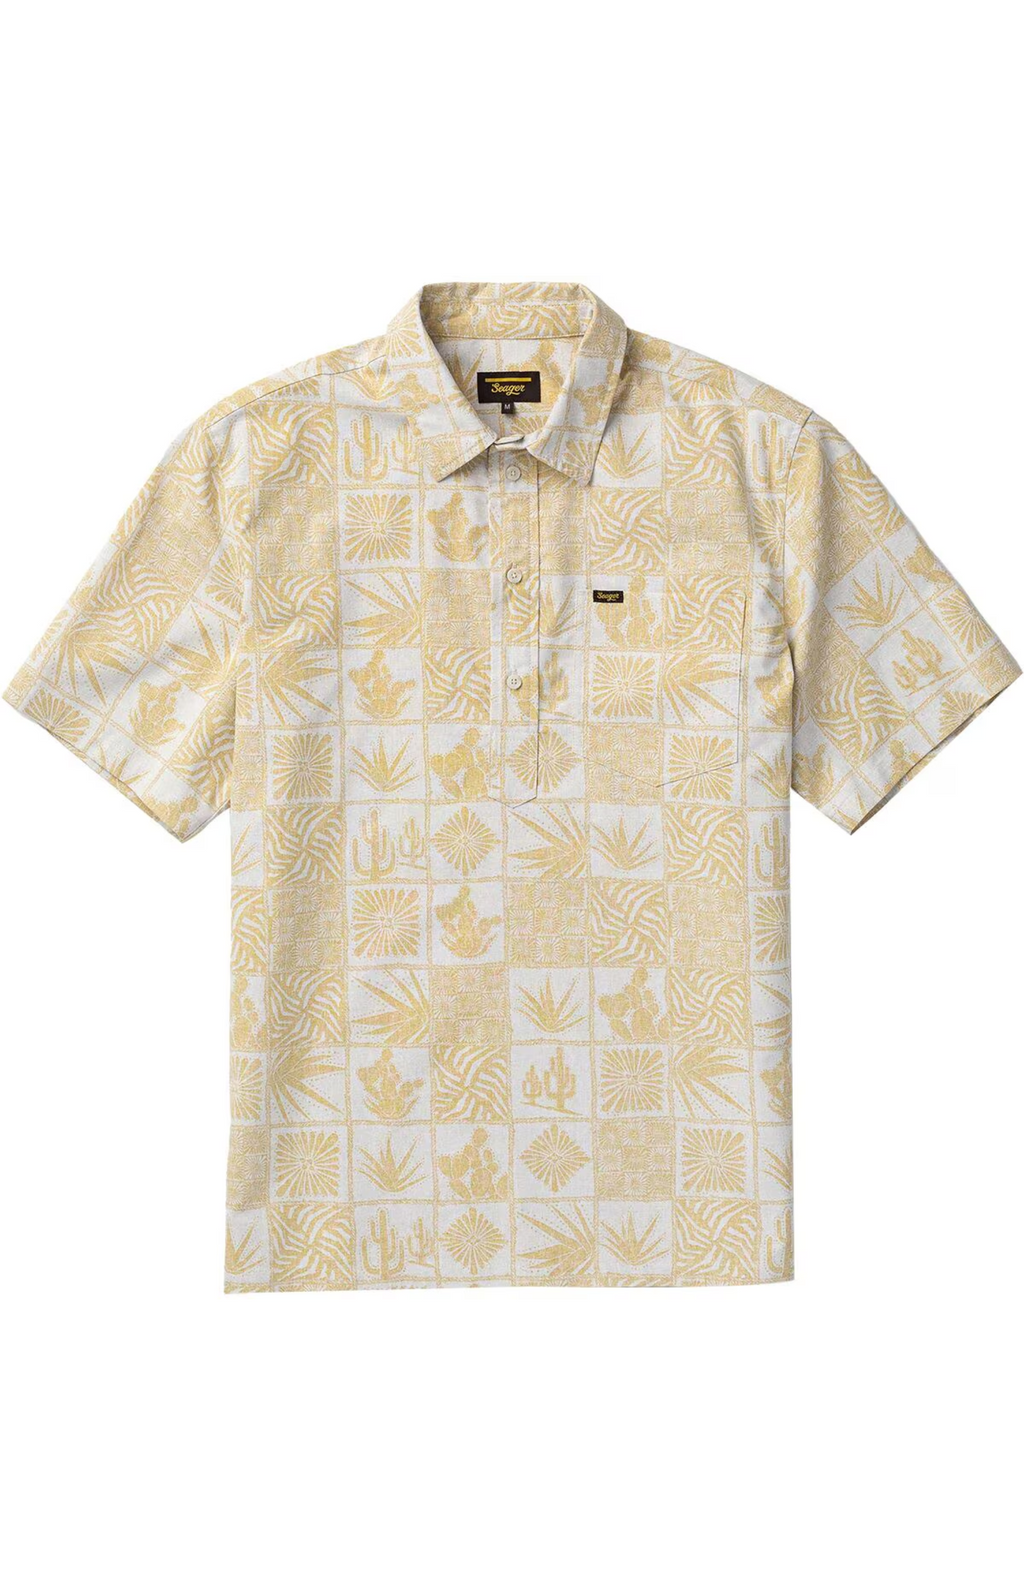 Seager - Schooner 3/4 Button Up